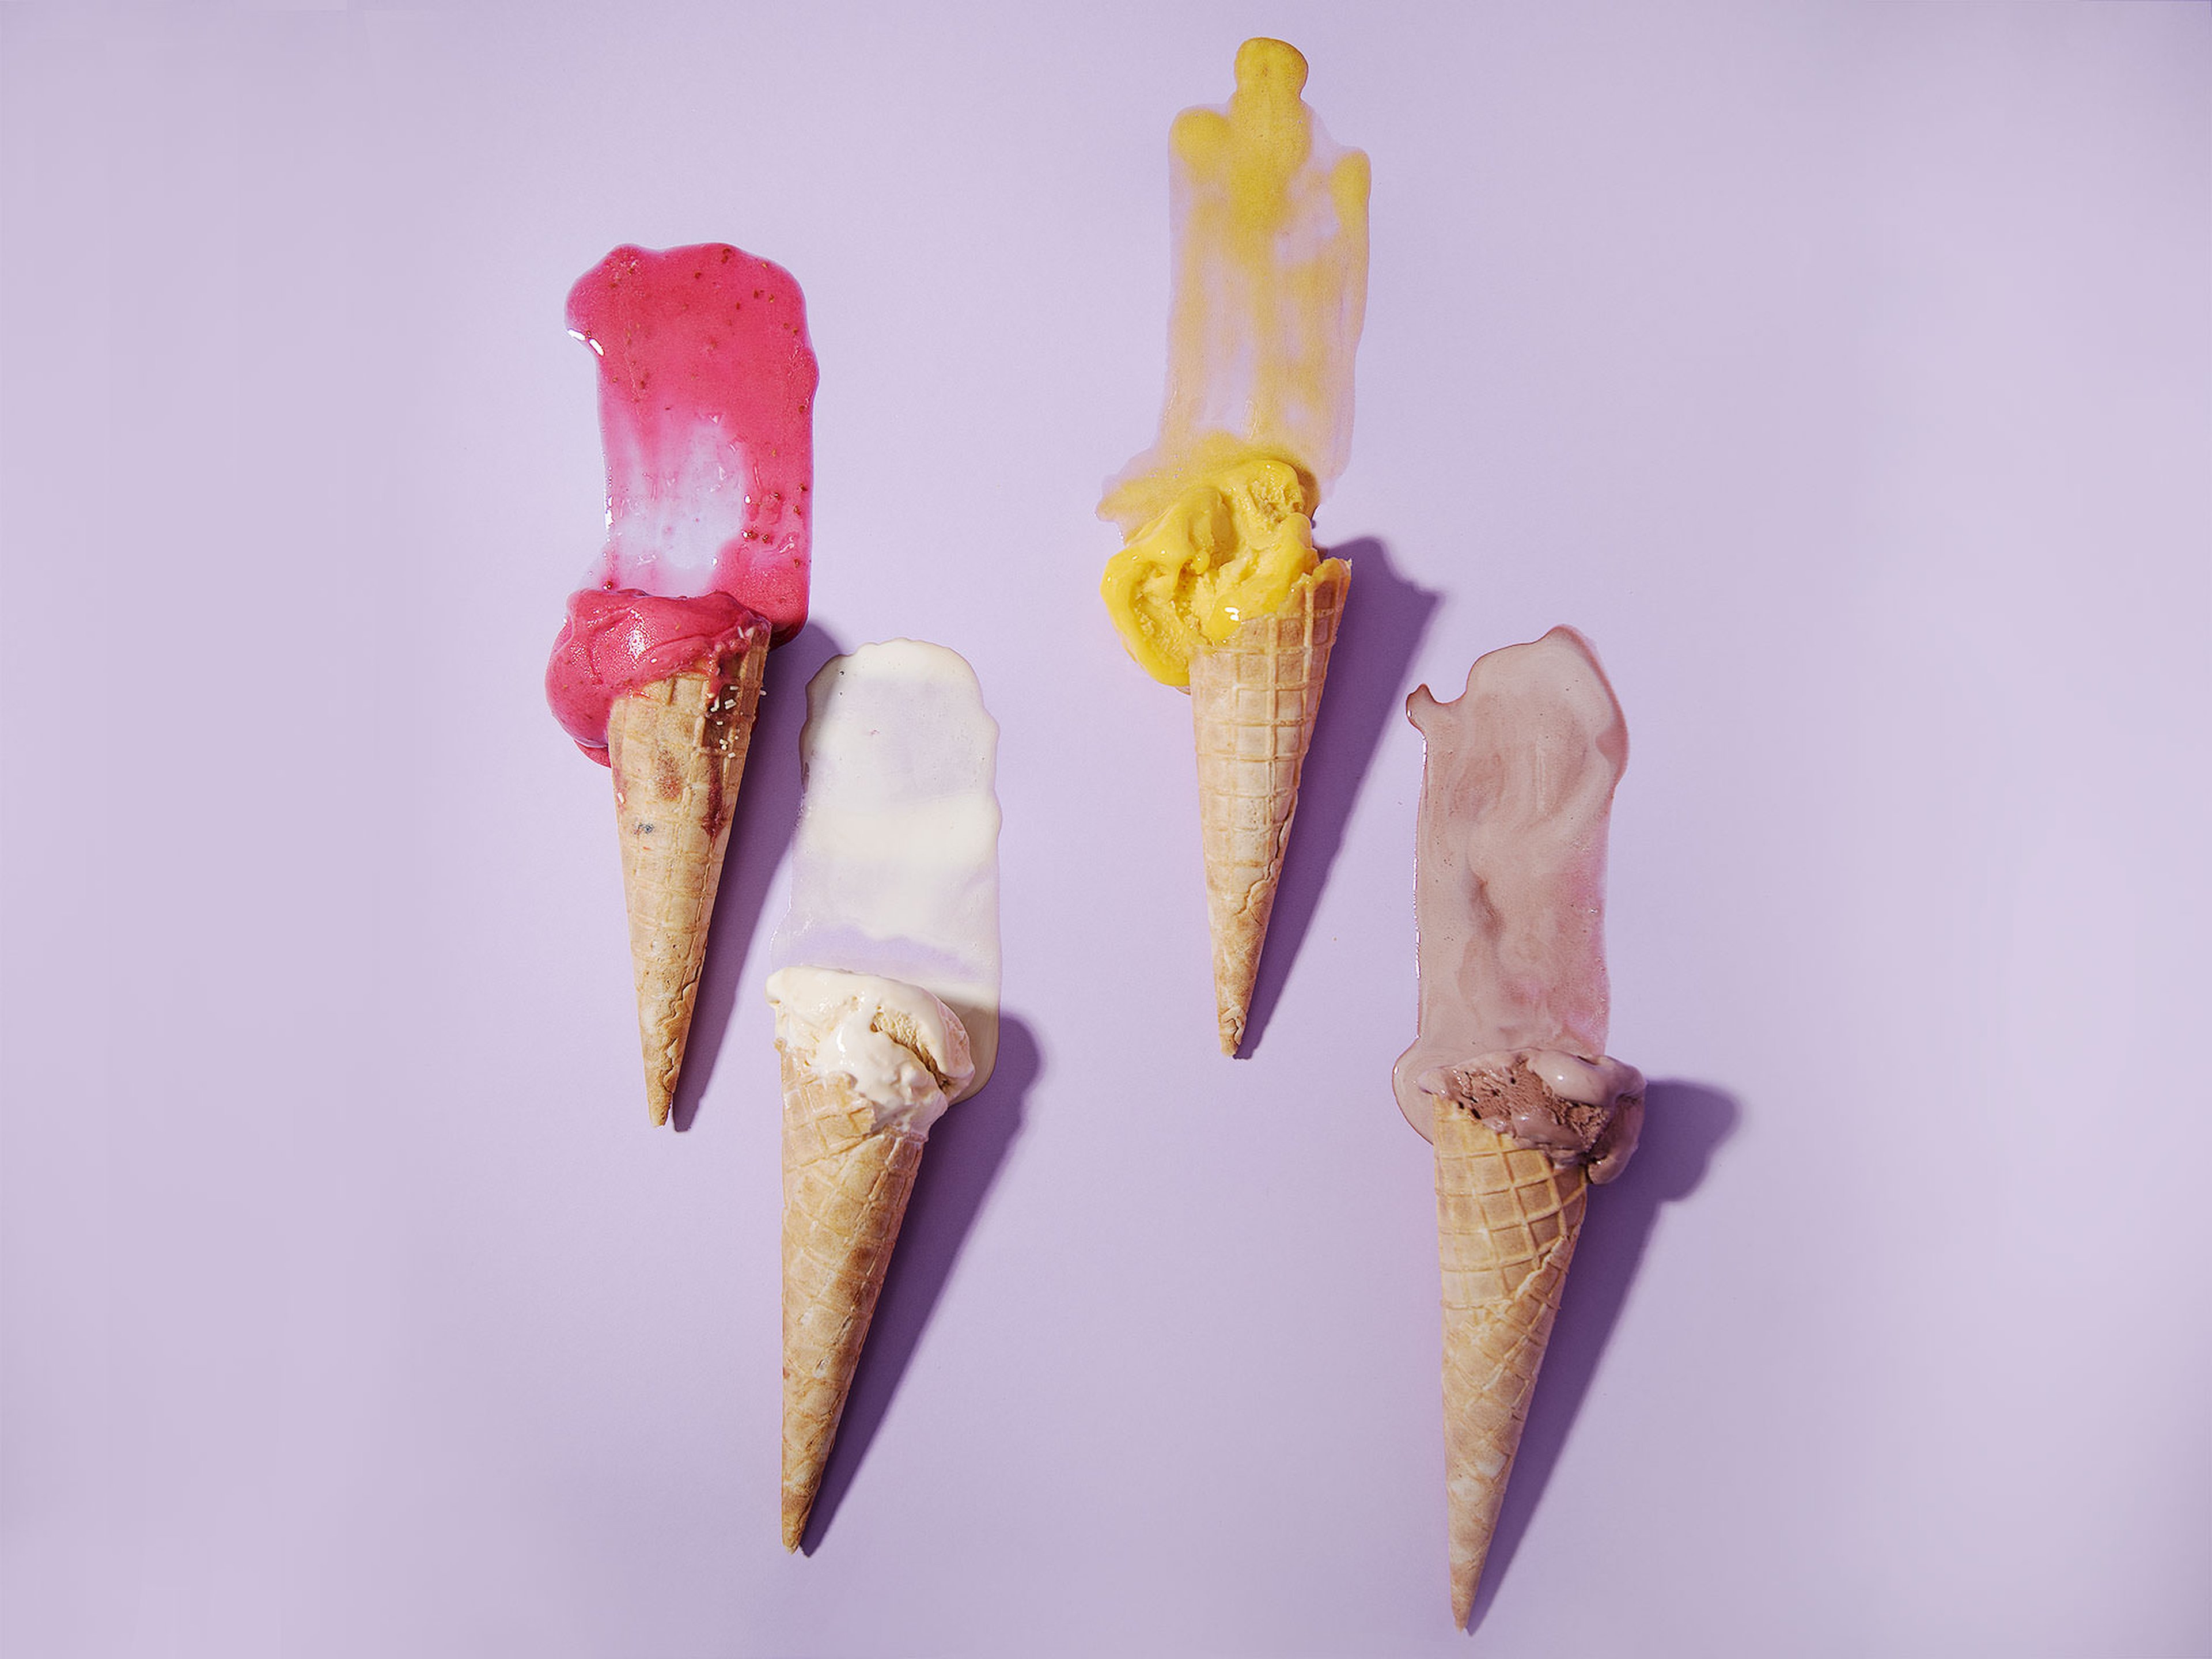 Where Does Ice Cream Really Come From?